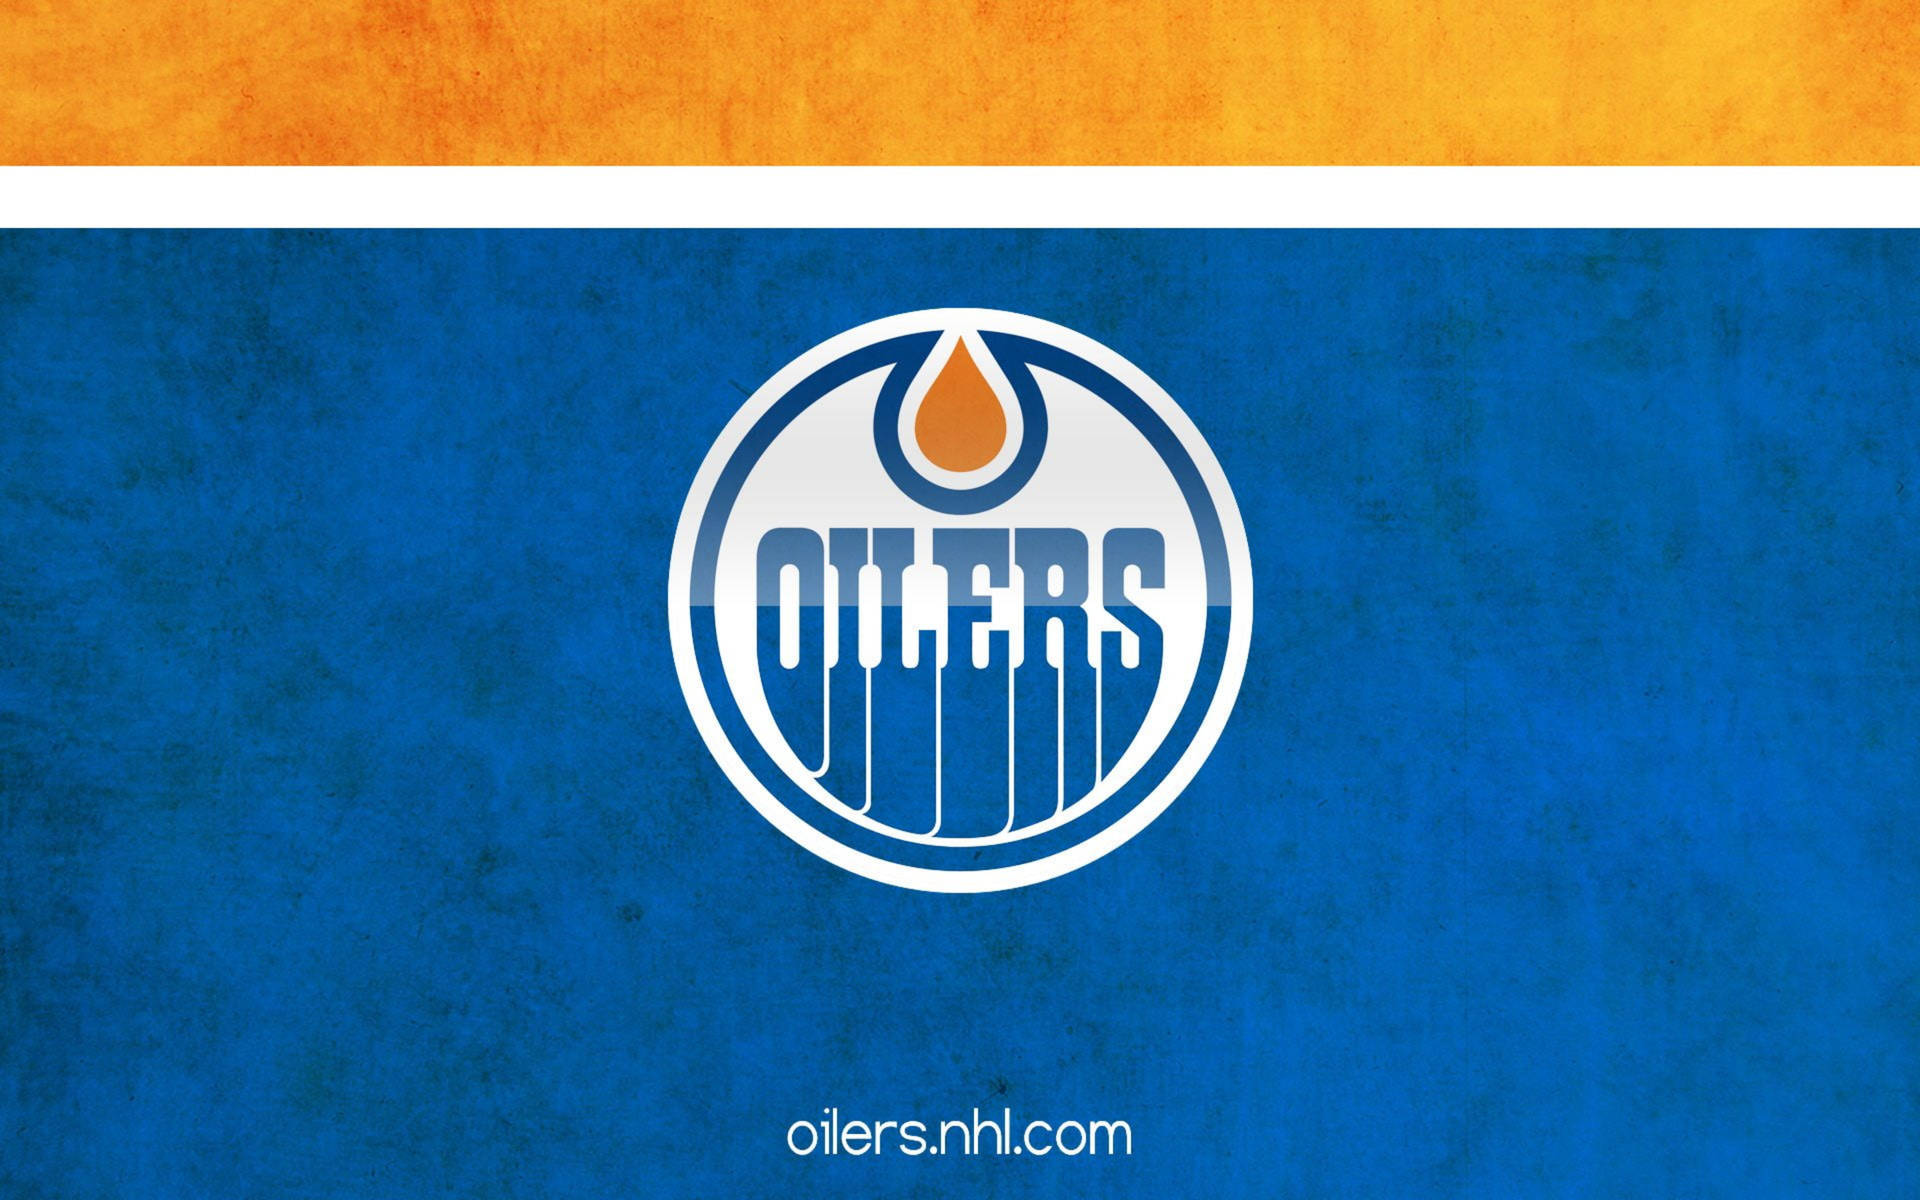 Edmonton Oilers In Action During A High Stakes Hockey Game